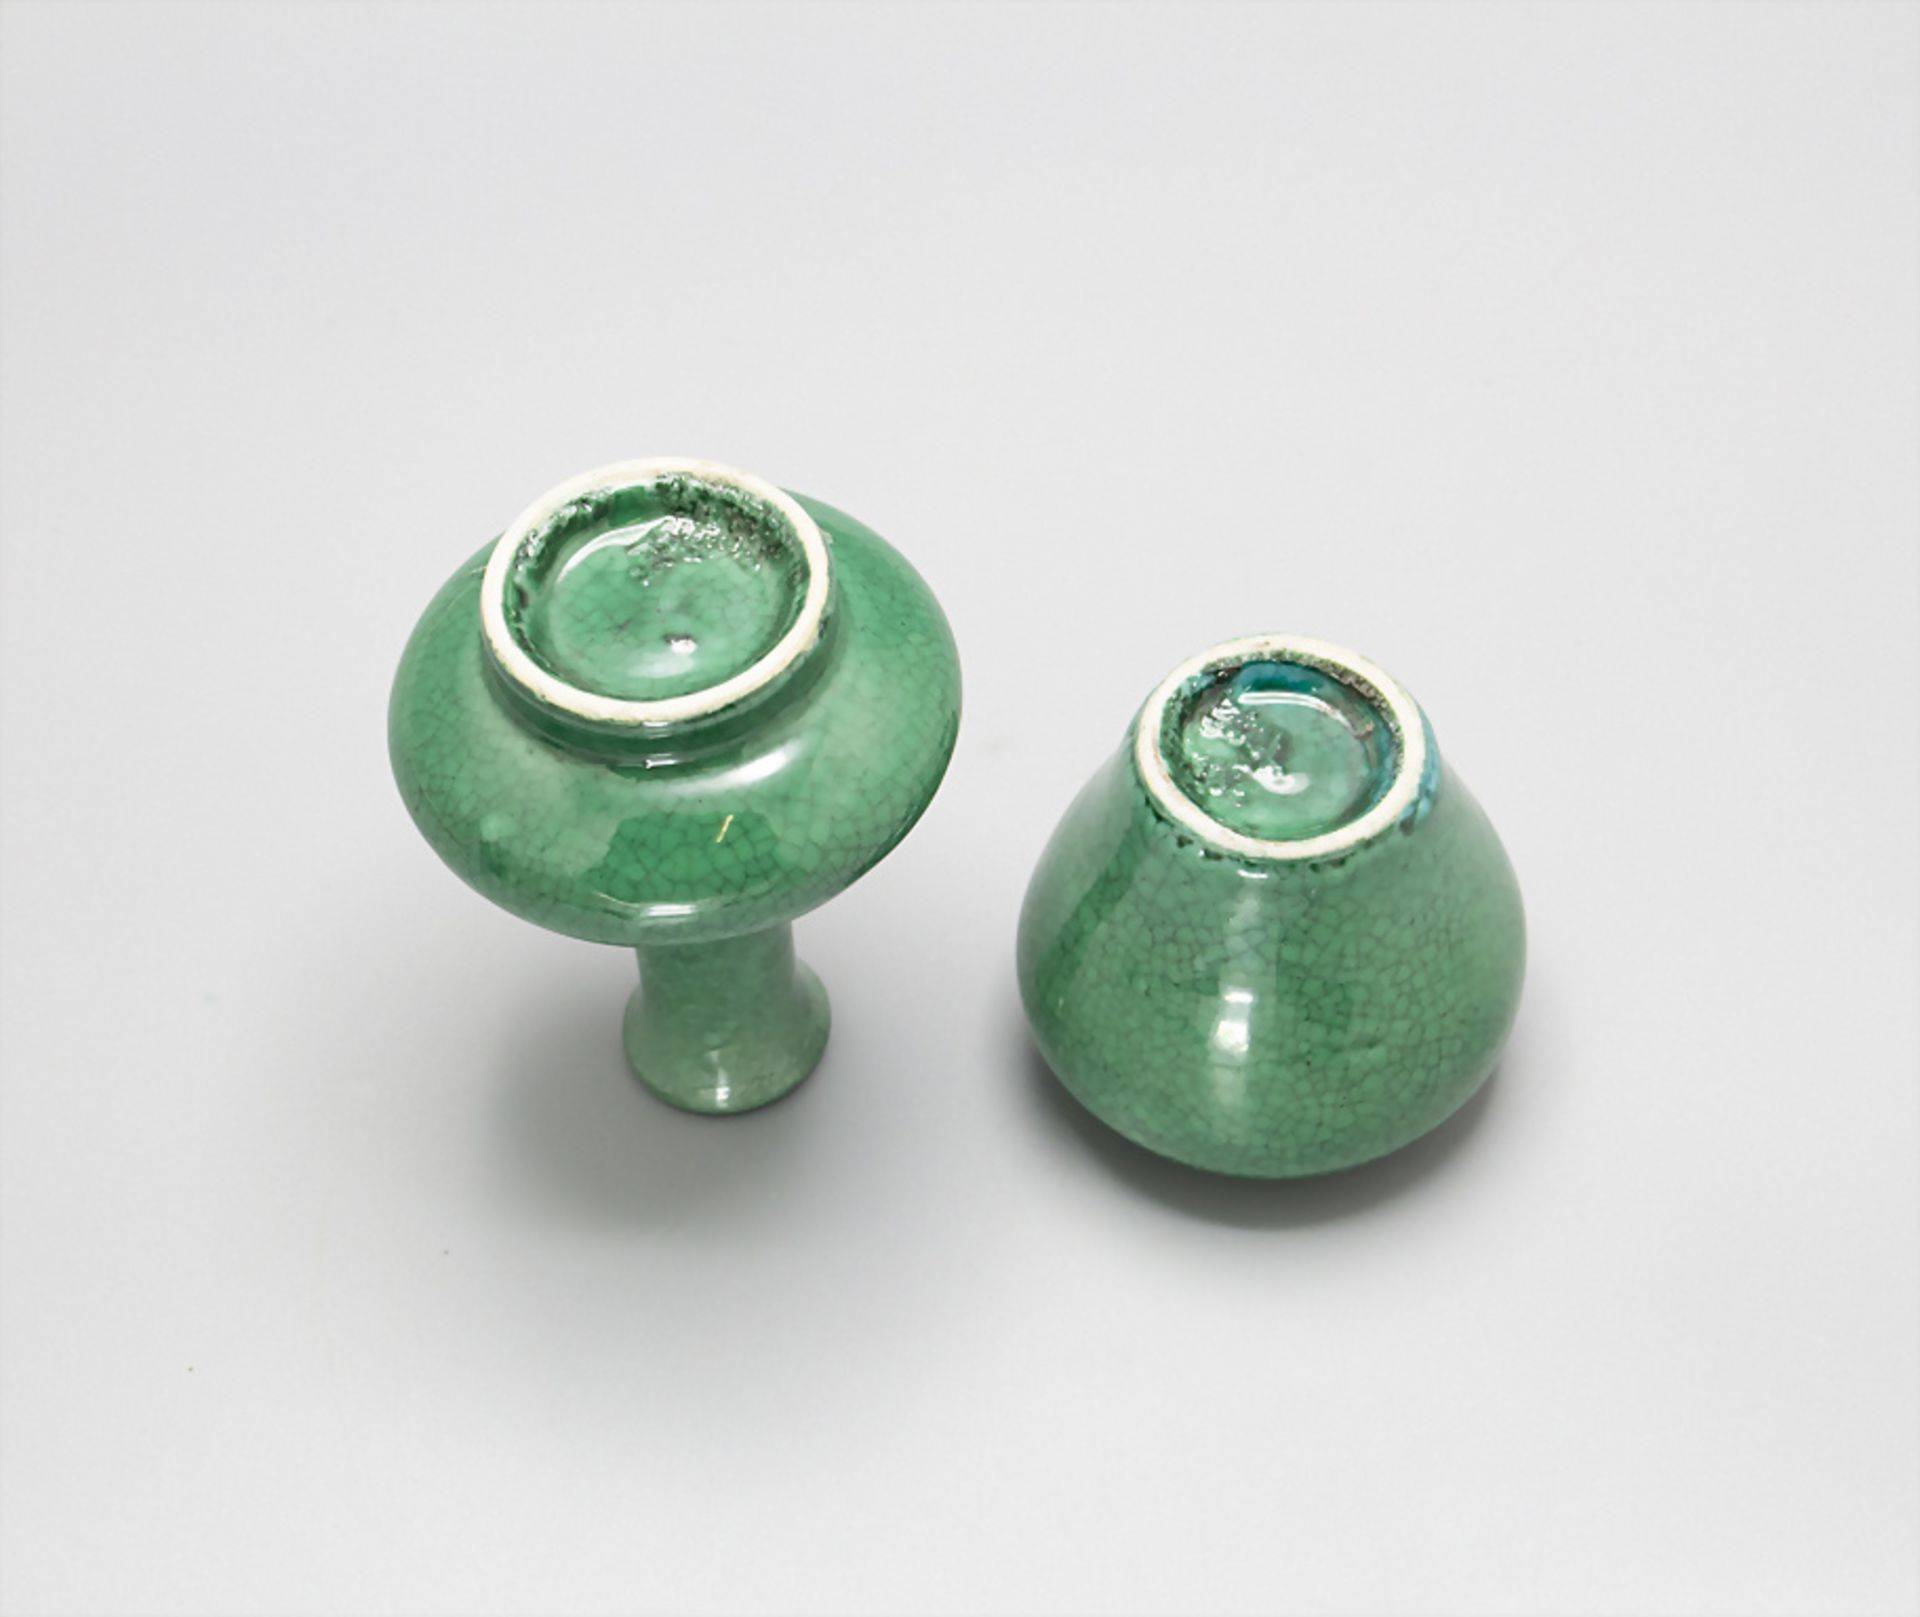 Paar kleine grüne Vasen / A pair of two small green vases, China, Qing-Zeit, 19. Jh. - Image 3 of 3